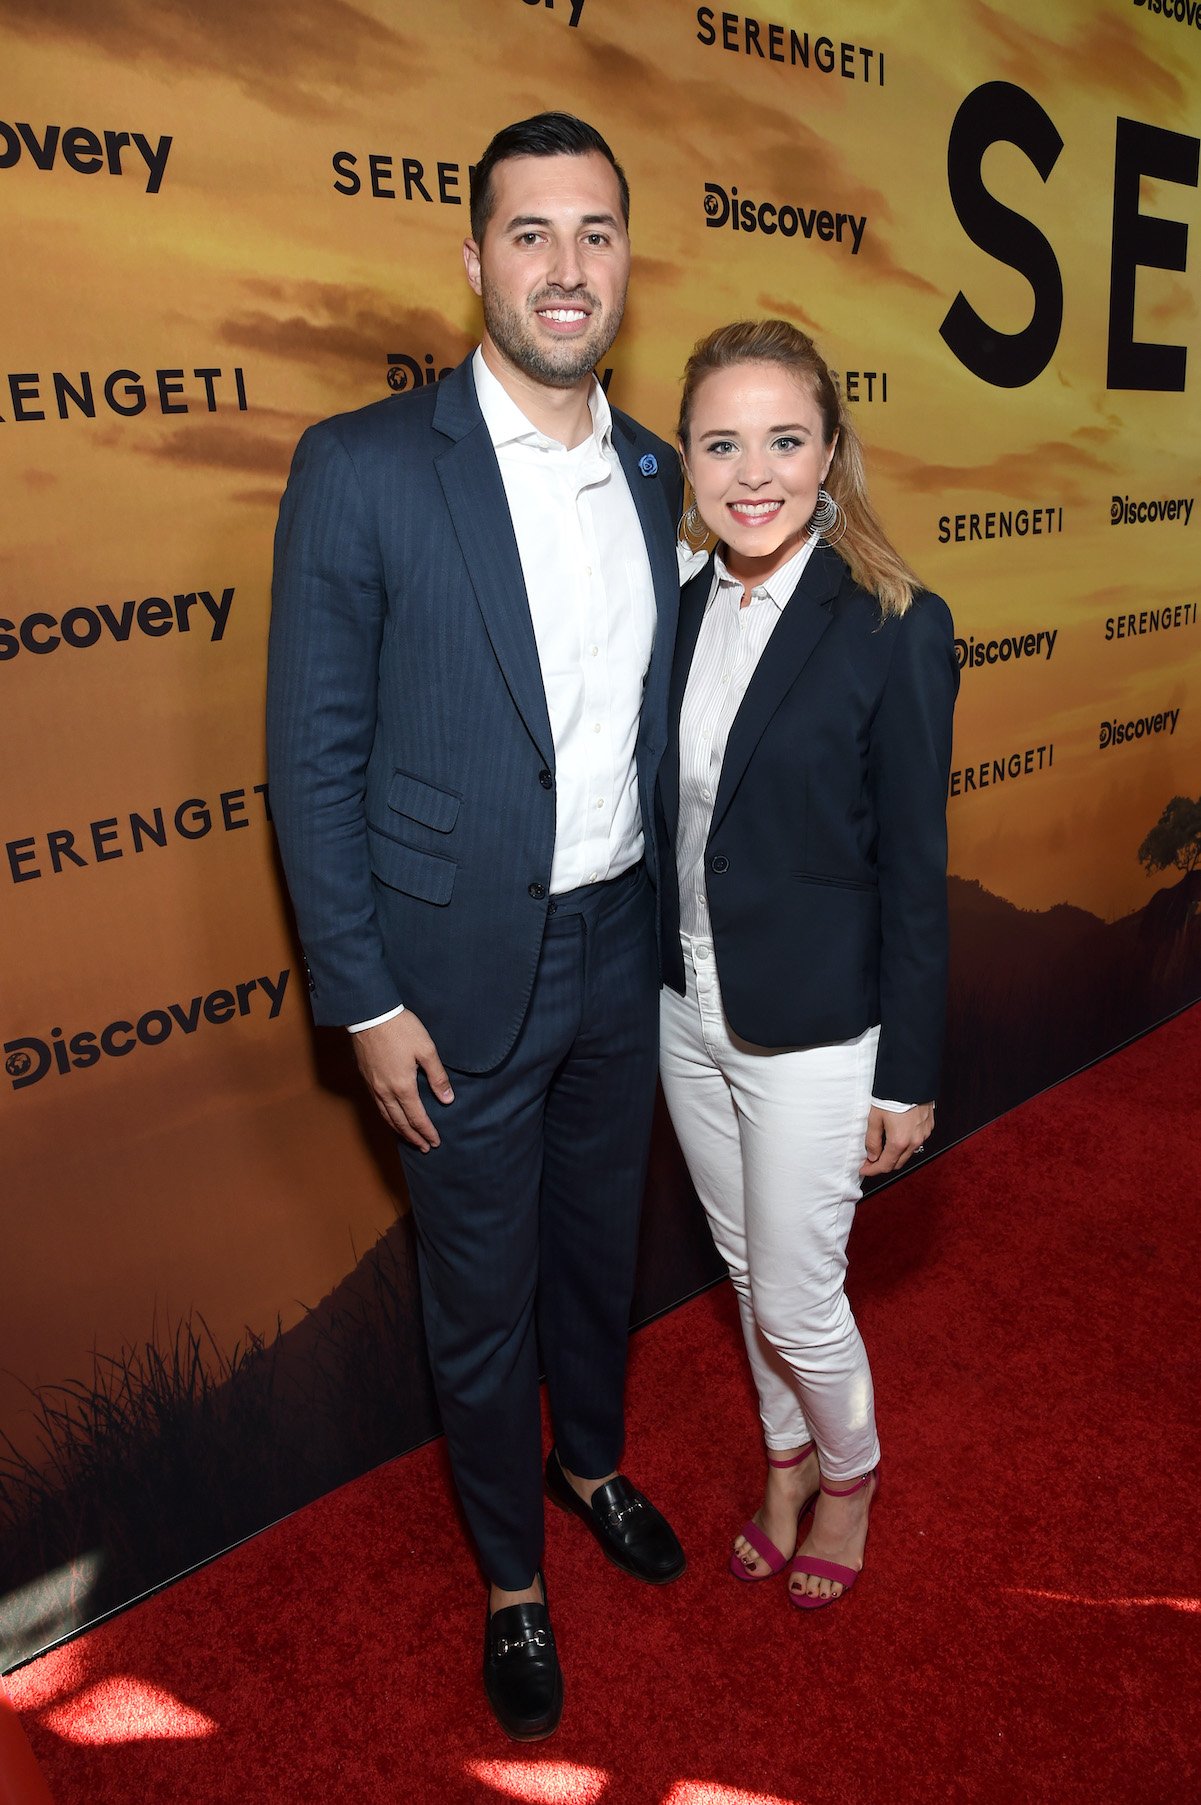 ‘Counting On’ Viewers Applaud Jinger Duggar For Her Recent Outfit: ‘Good For Her’